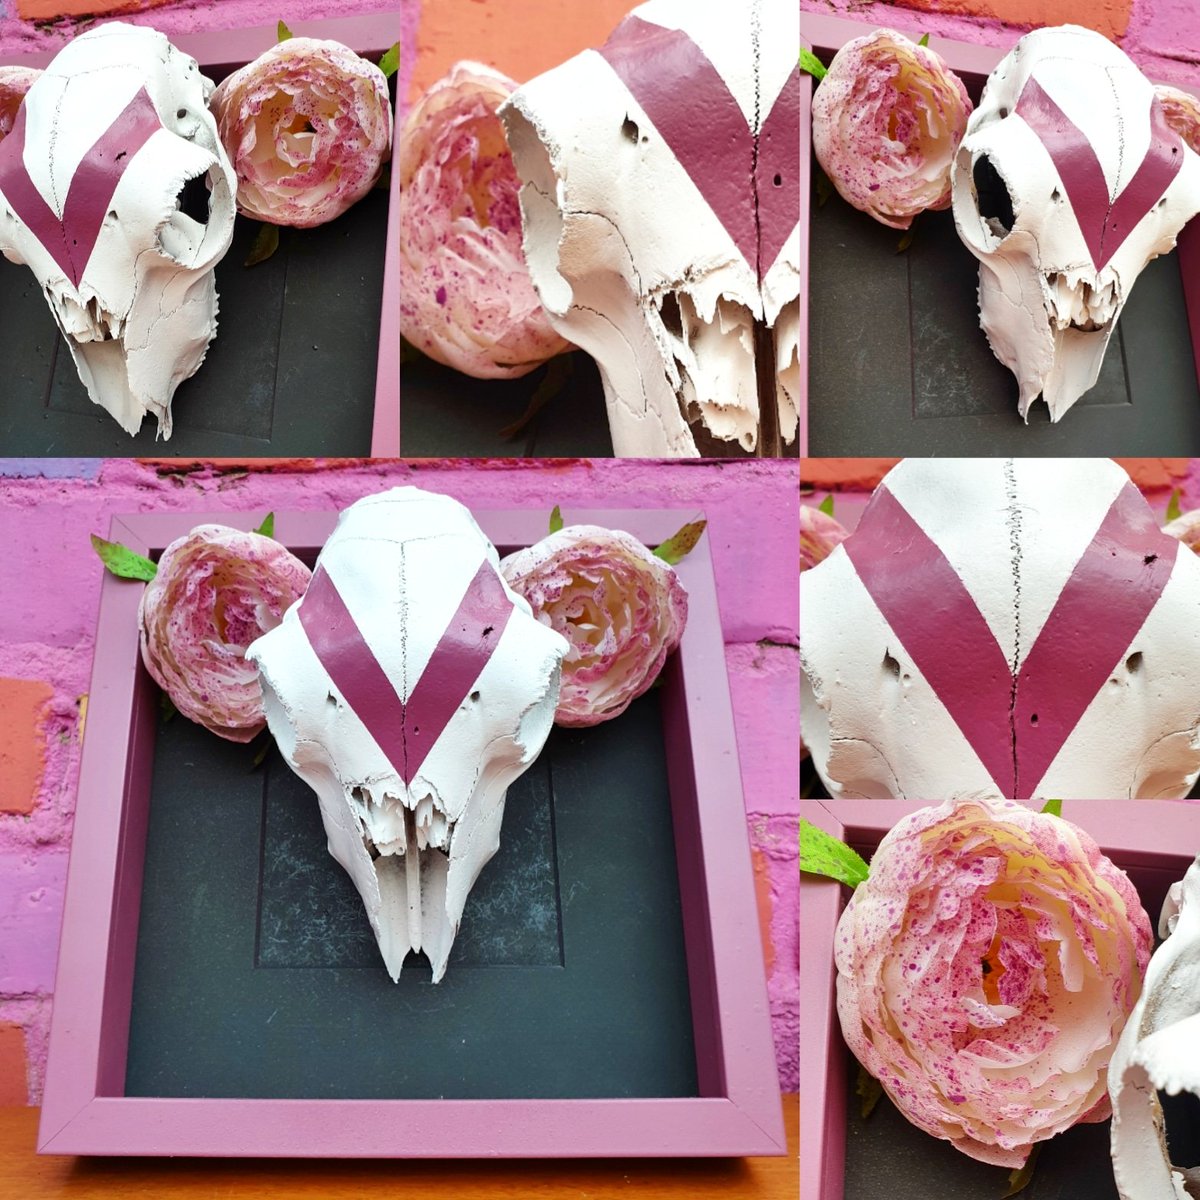 Lots of #giftideas for #MothersDay on my etsy store -check out this particularly bold one 💜
etsy.com/shop/BeautyInD…
#womaninbizhour #ukcraftershour #ukgiftam #ukgifthour #WomensDay #smallbizshoutuk #SmallBiz #MarchMeetTheMaker #meetthemaker #taxidermy #floralgift #UKEtsyRT